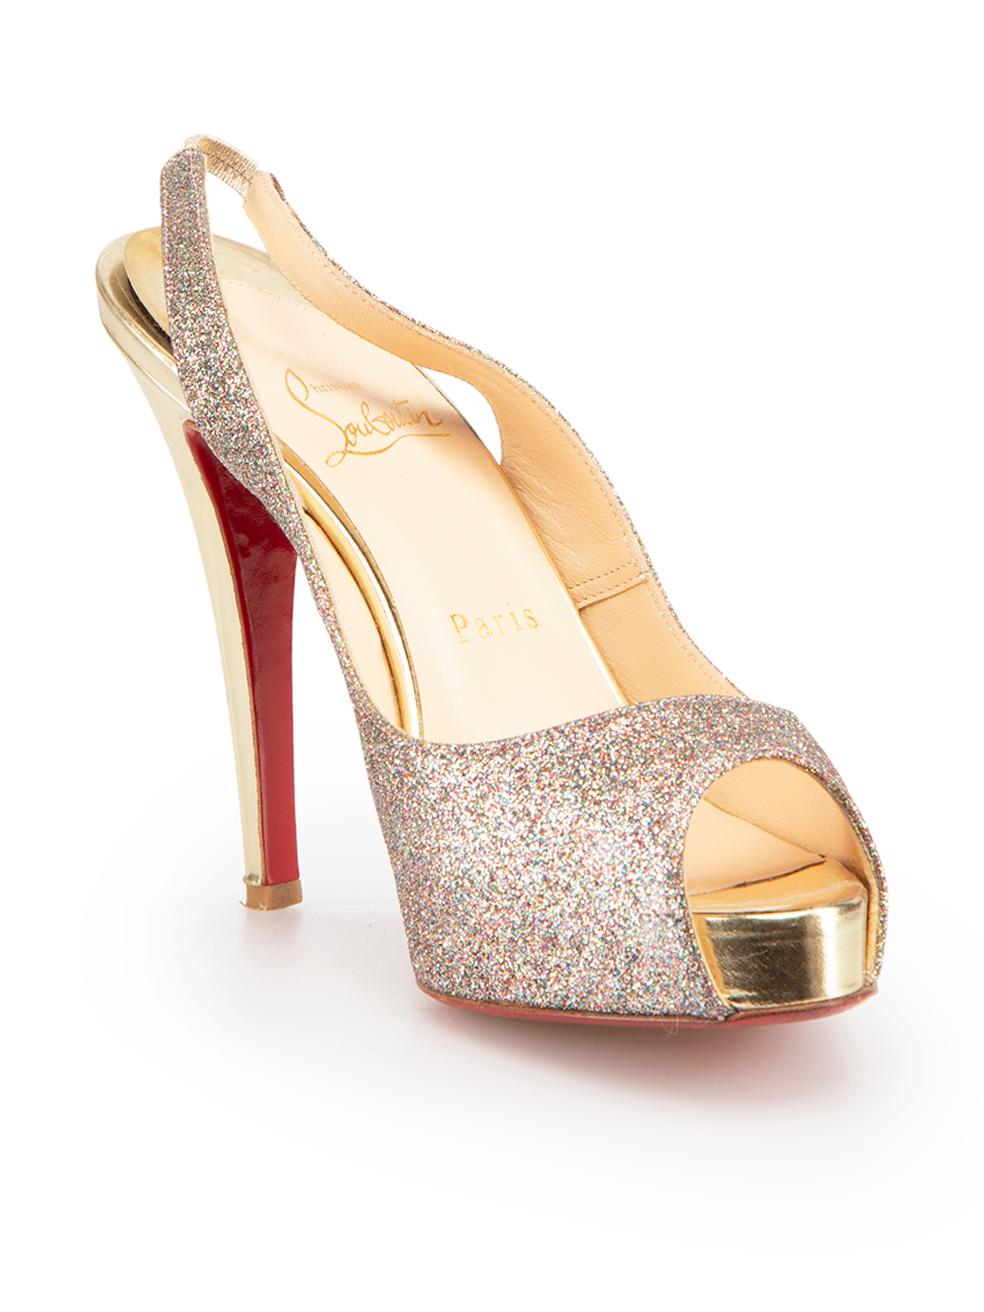 CONDITION is Good. Minor wear to shoes is evident. Light wear to both shoe heels with indents to the leather and both insoles have started peeling off on this used Christian Louboutin designer resale item.
 
 Details
 Multicolour
 Glitter
 Heels
